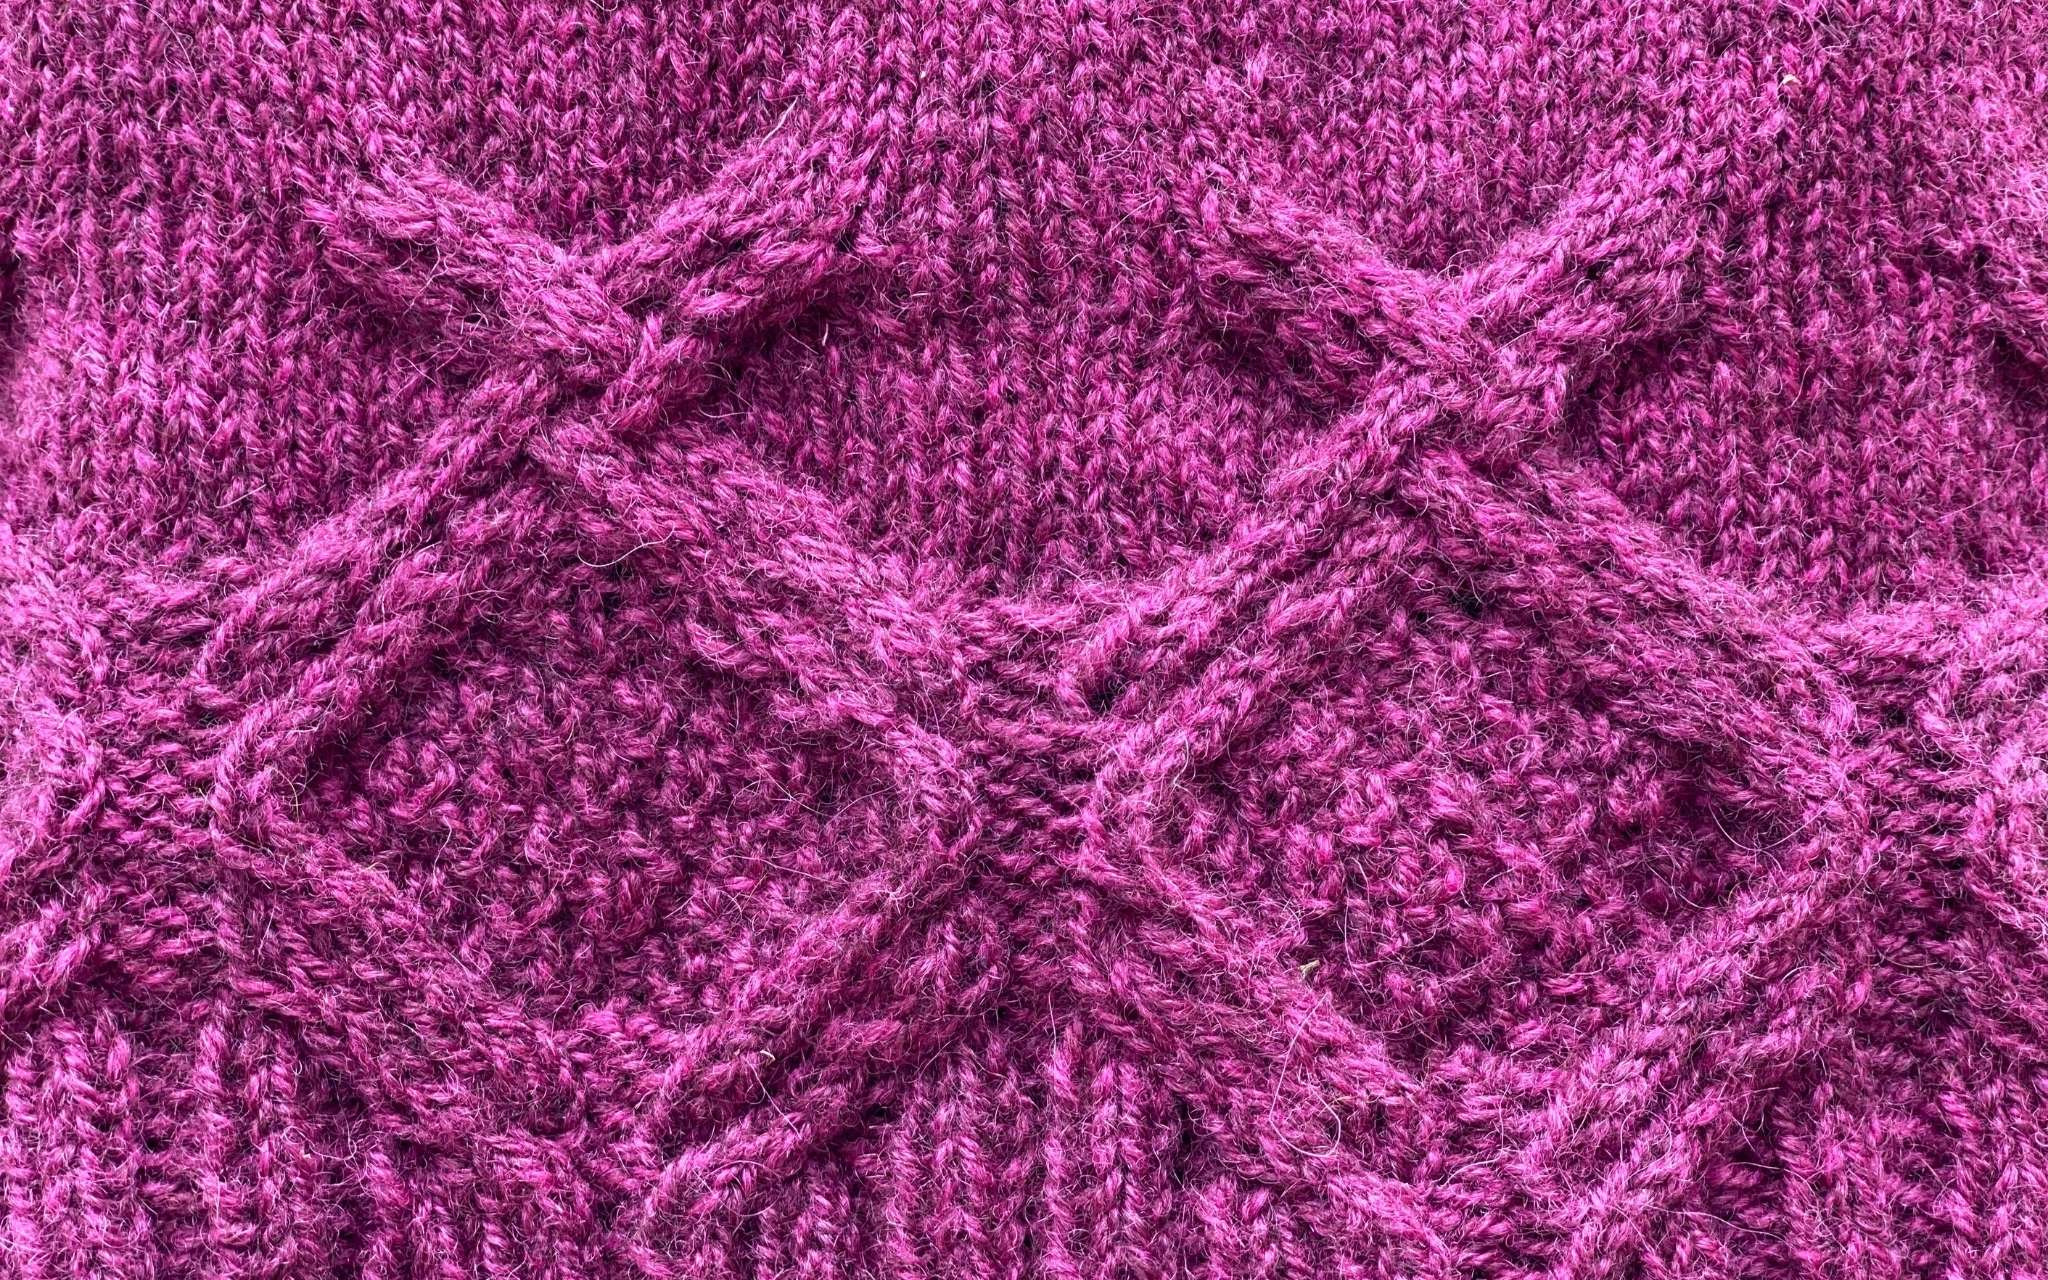 Ho to knit round shape in sleeves / Knitting round border